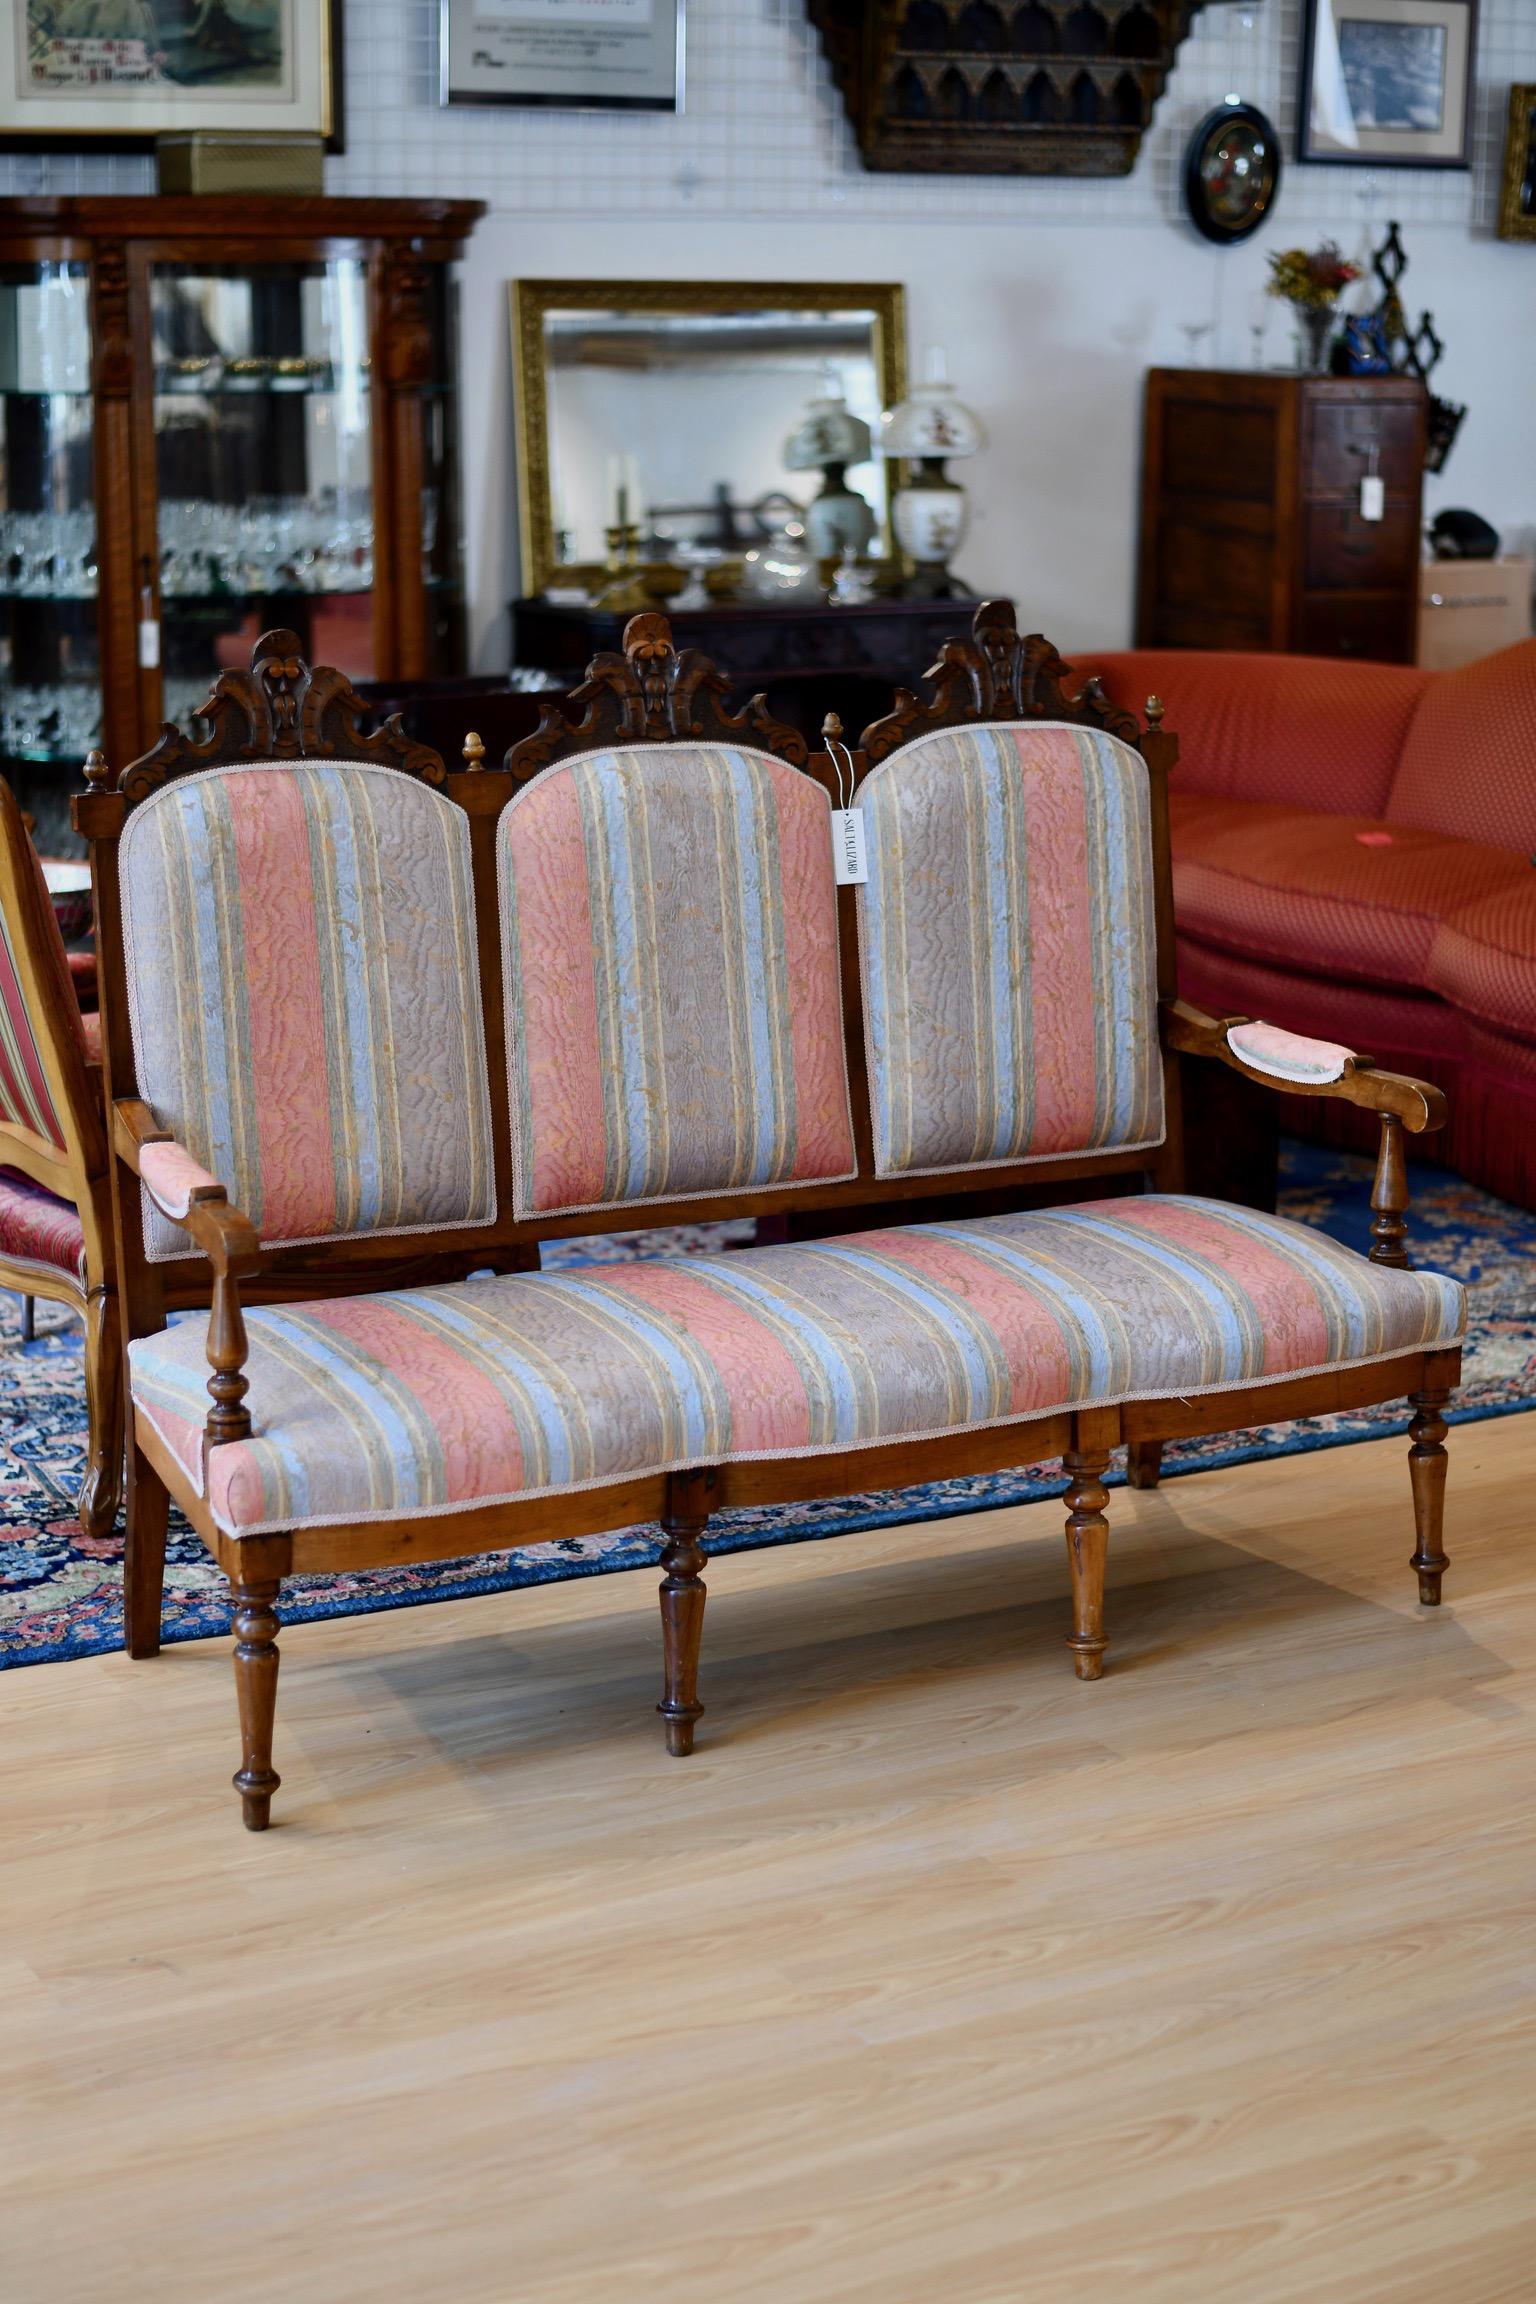 Eastlake Victorian canape settee in striped upholstery with carved frame. Upholstery likely newer than frame. In good vintage condition. Dimensions: 62